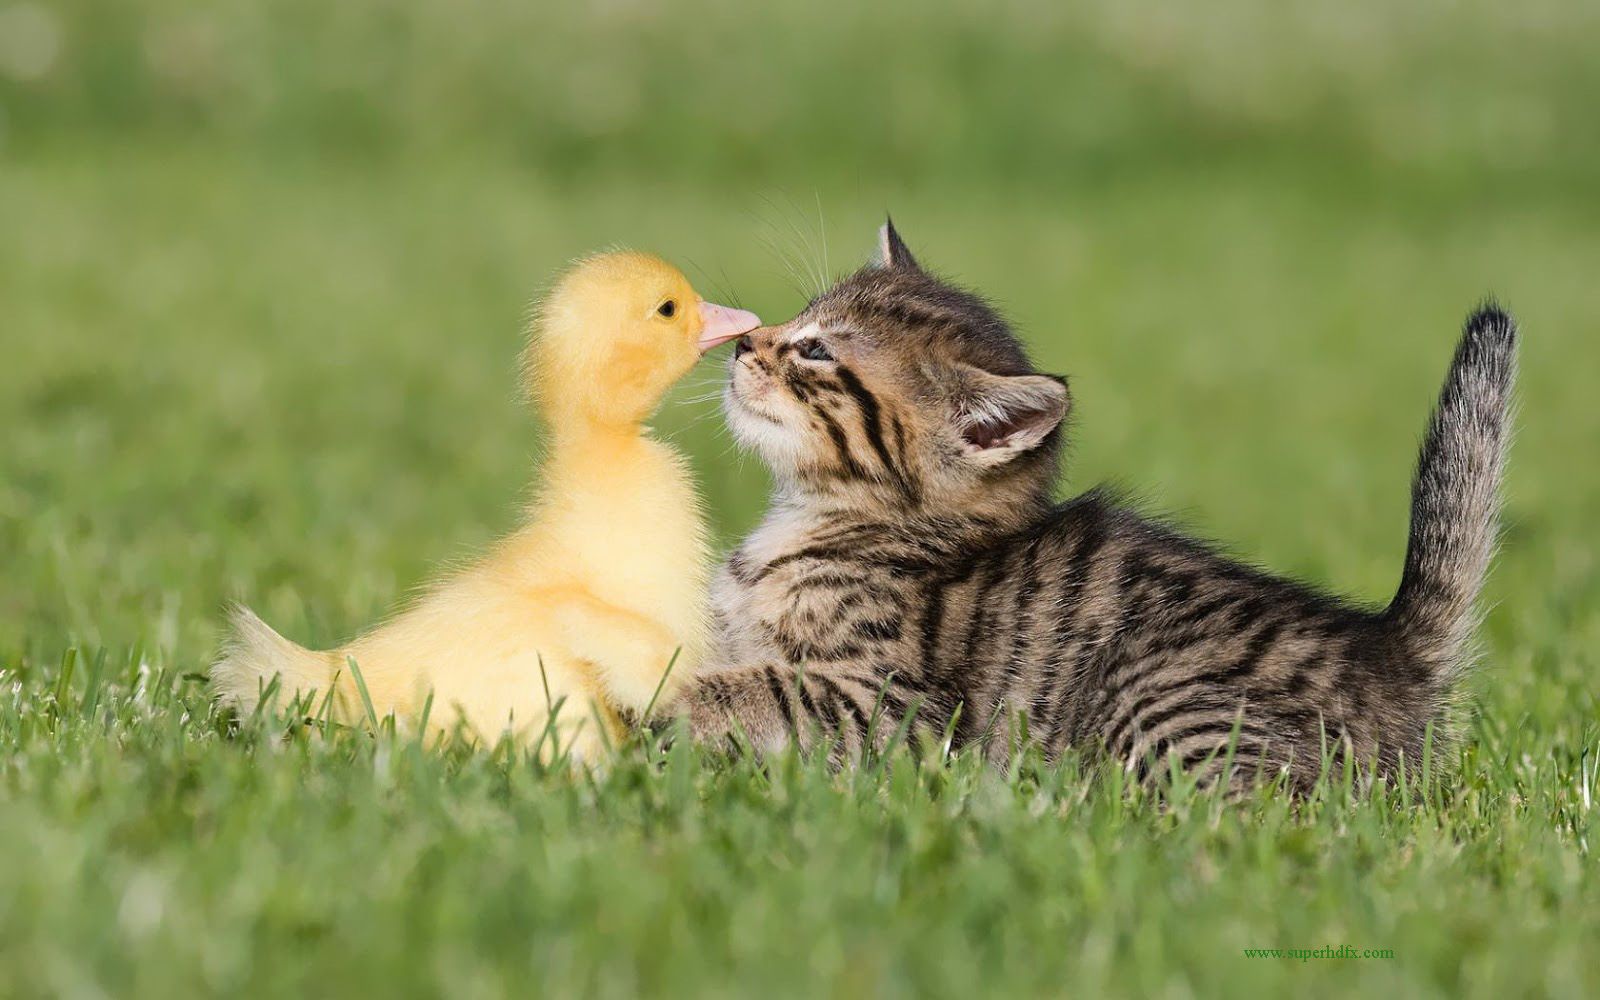 duck-and-cat-wallpapers.jpg